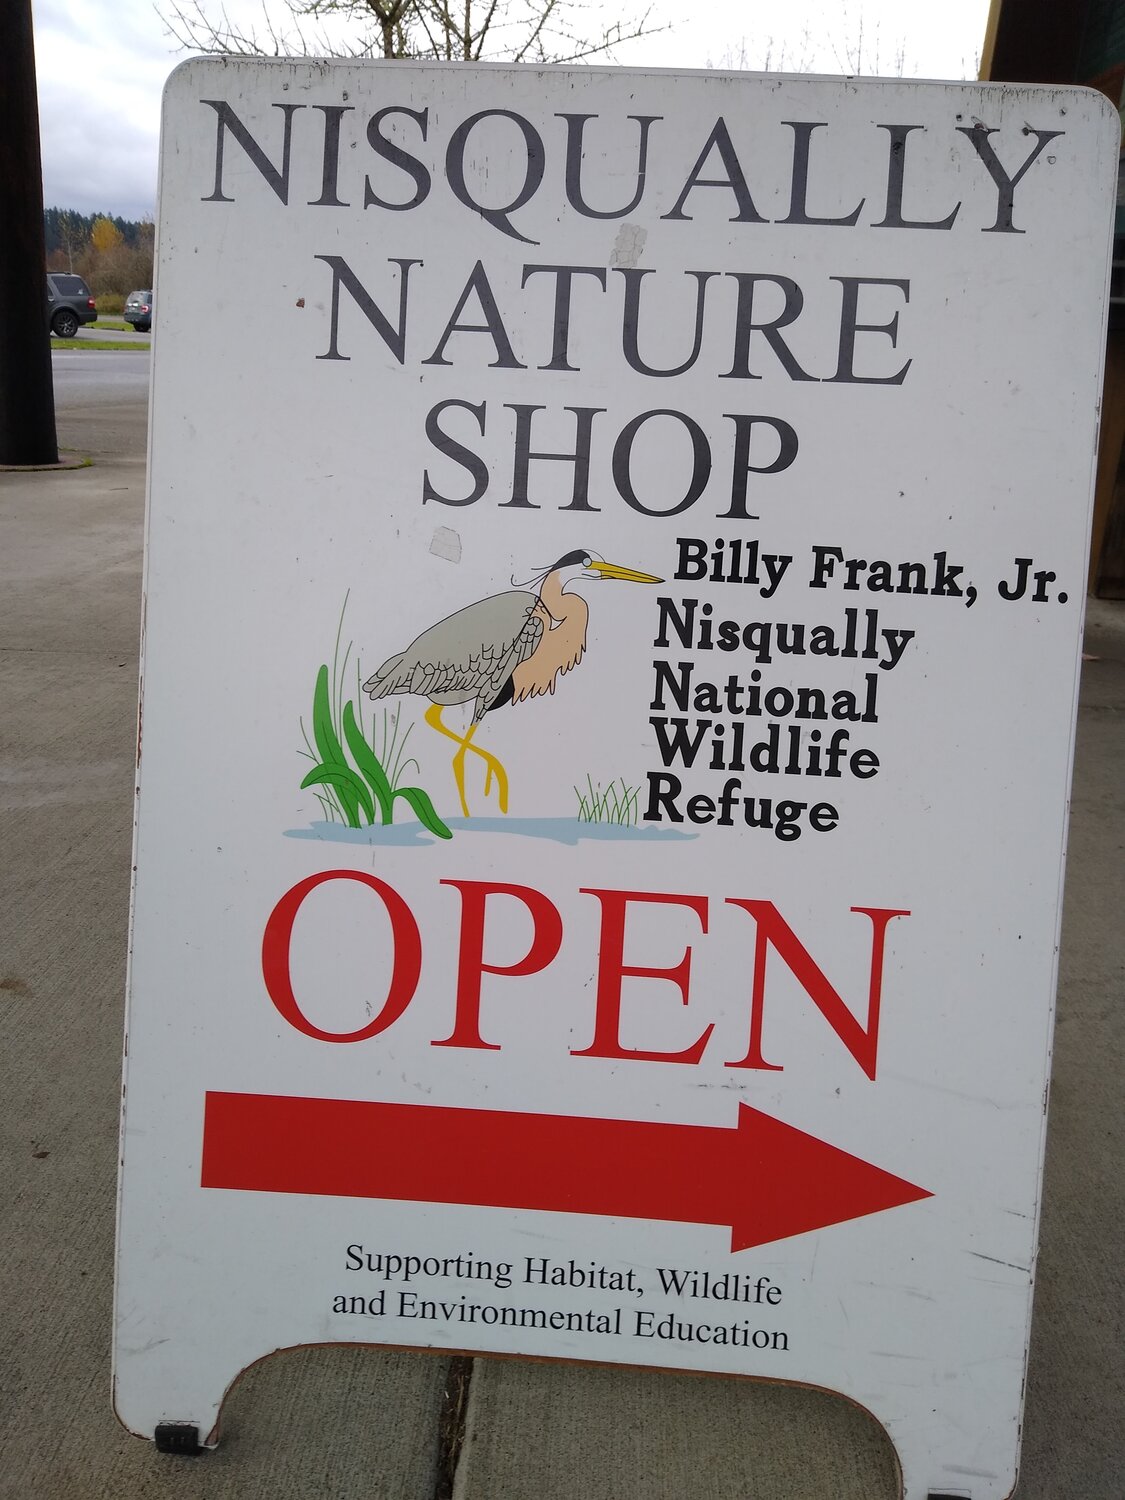 George suggests the gift shop at the Billy Frank, Jr. Nisqually National Wildlife Refuge as a place to find great gifts for kids.